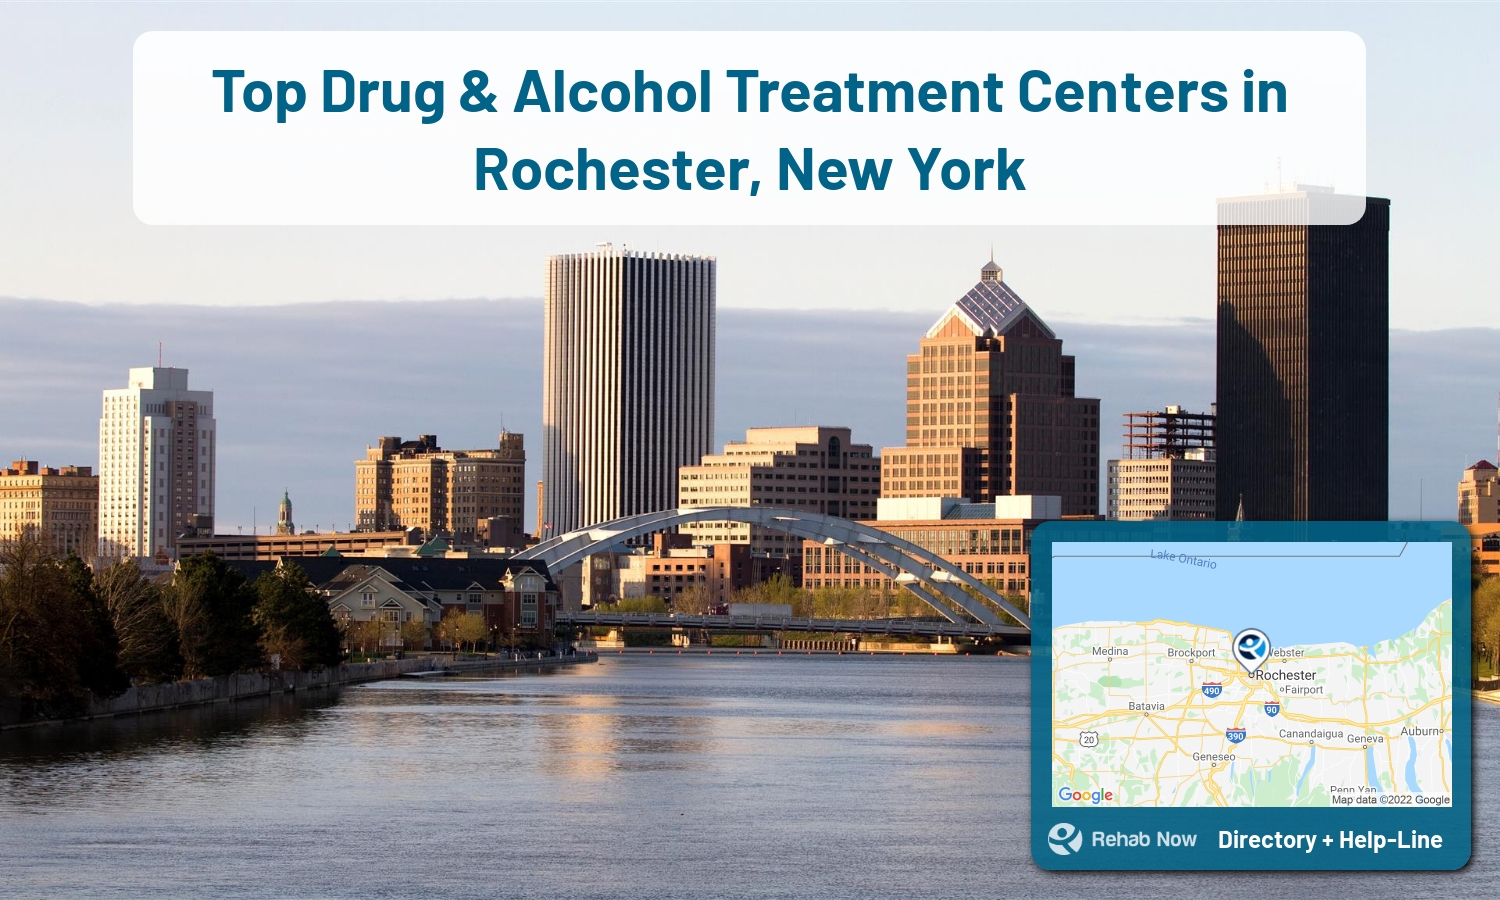 Ready to pick a rehab center in Rochester? Get off alcohol, opiates, and other drugs, by selecting top drug rehab centers in New York